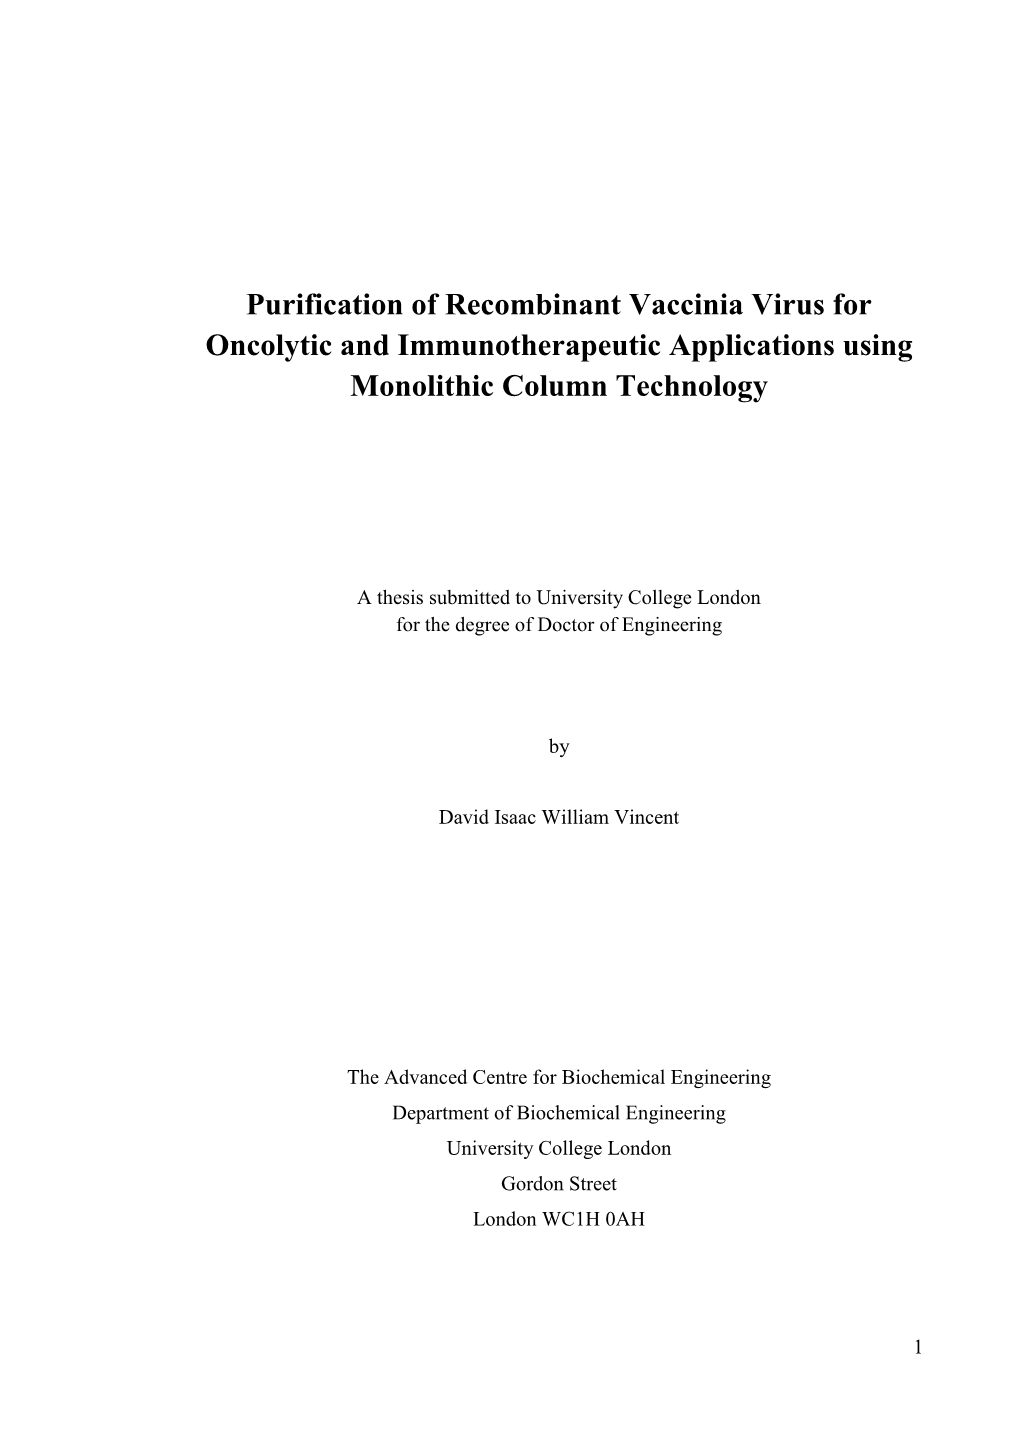 Purification of Recombinant Vaccinia Virus for Oncolytic and Immunotherapeutic Applications Using Monolithic Column Technology